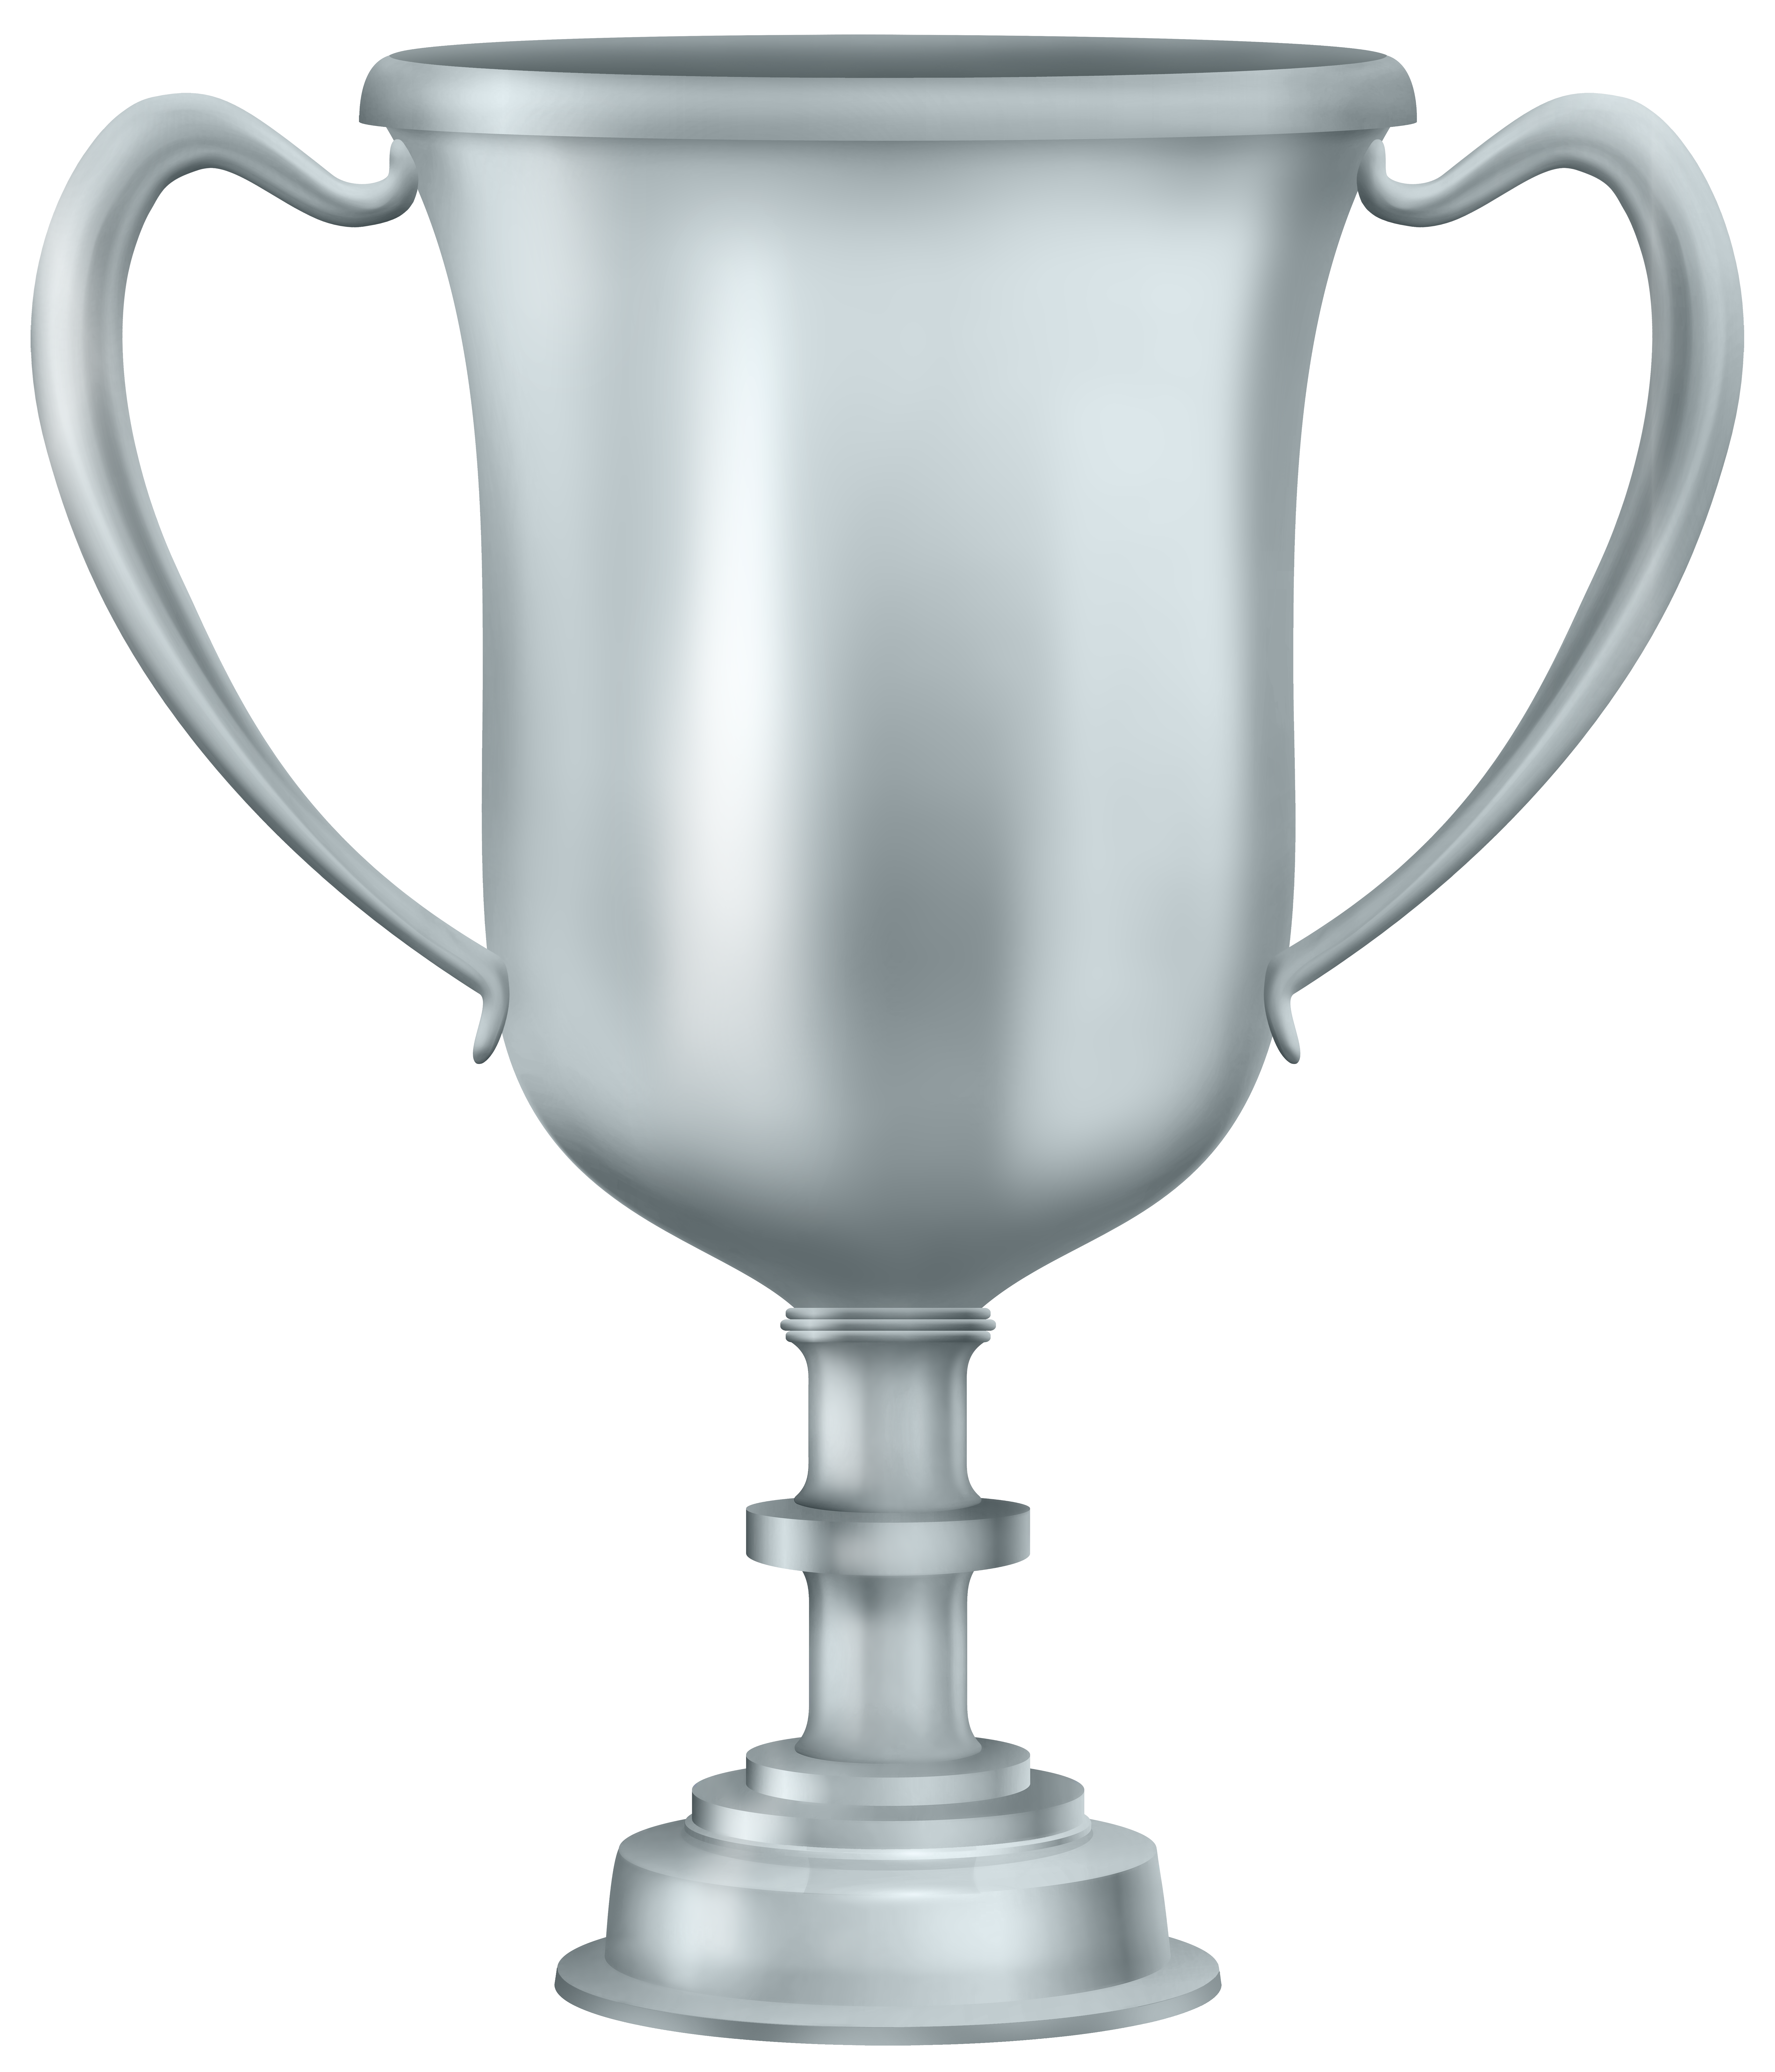 silver trophy png